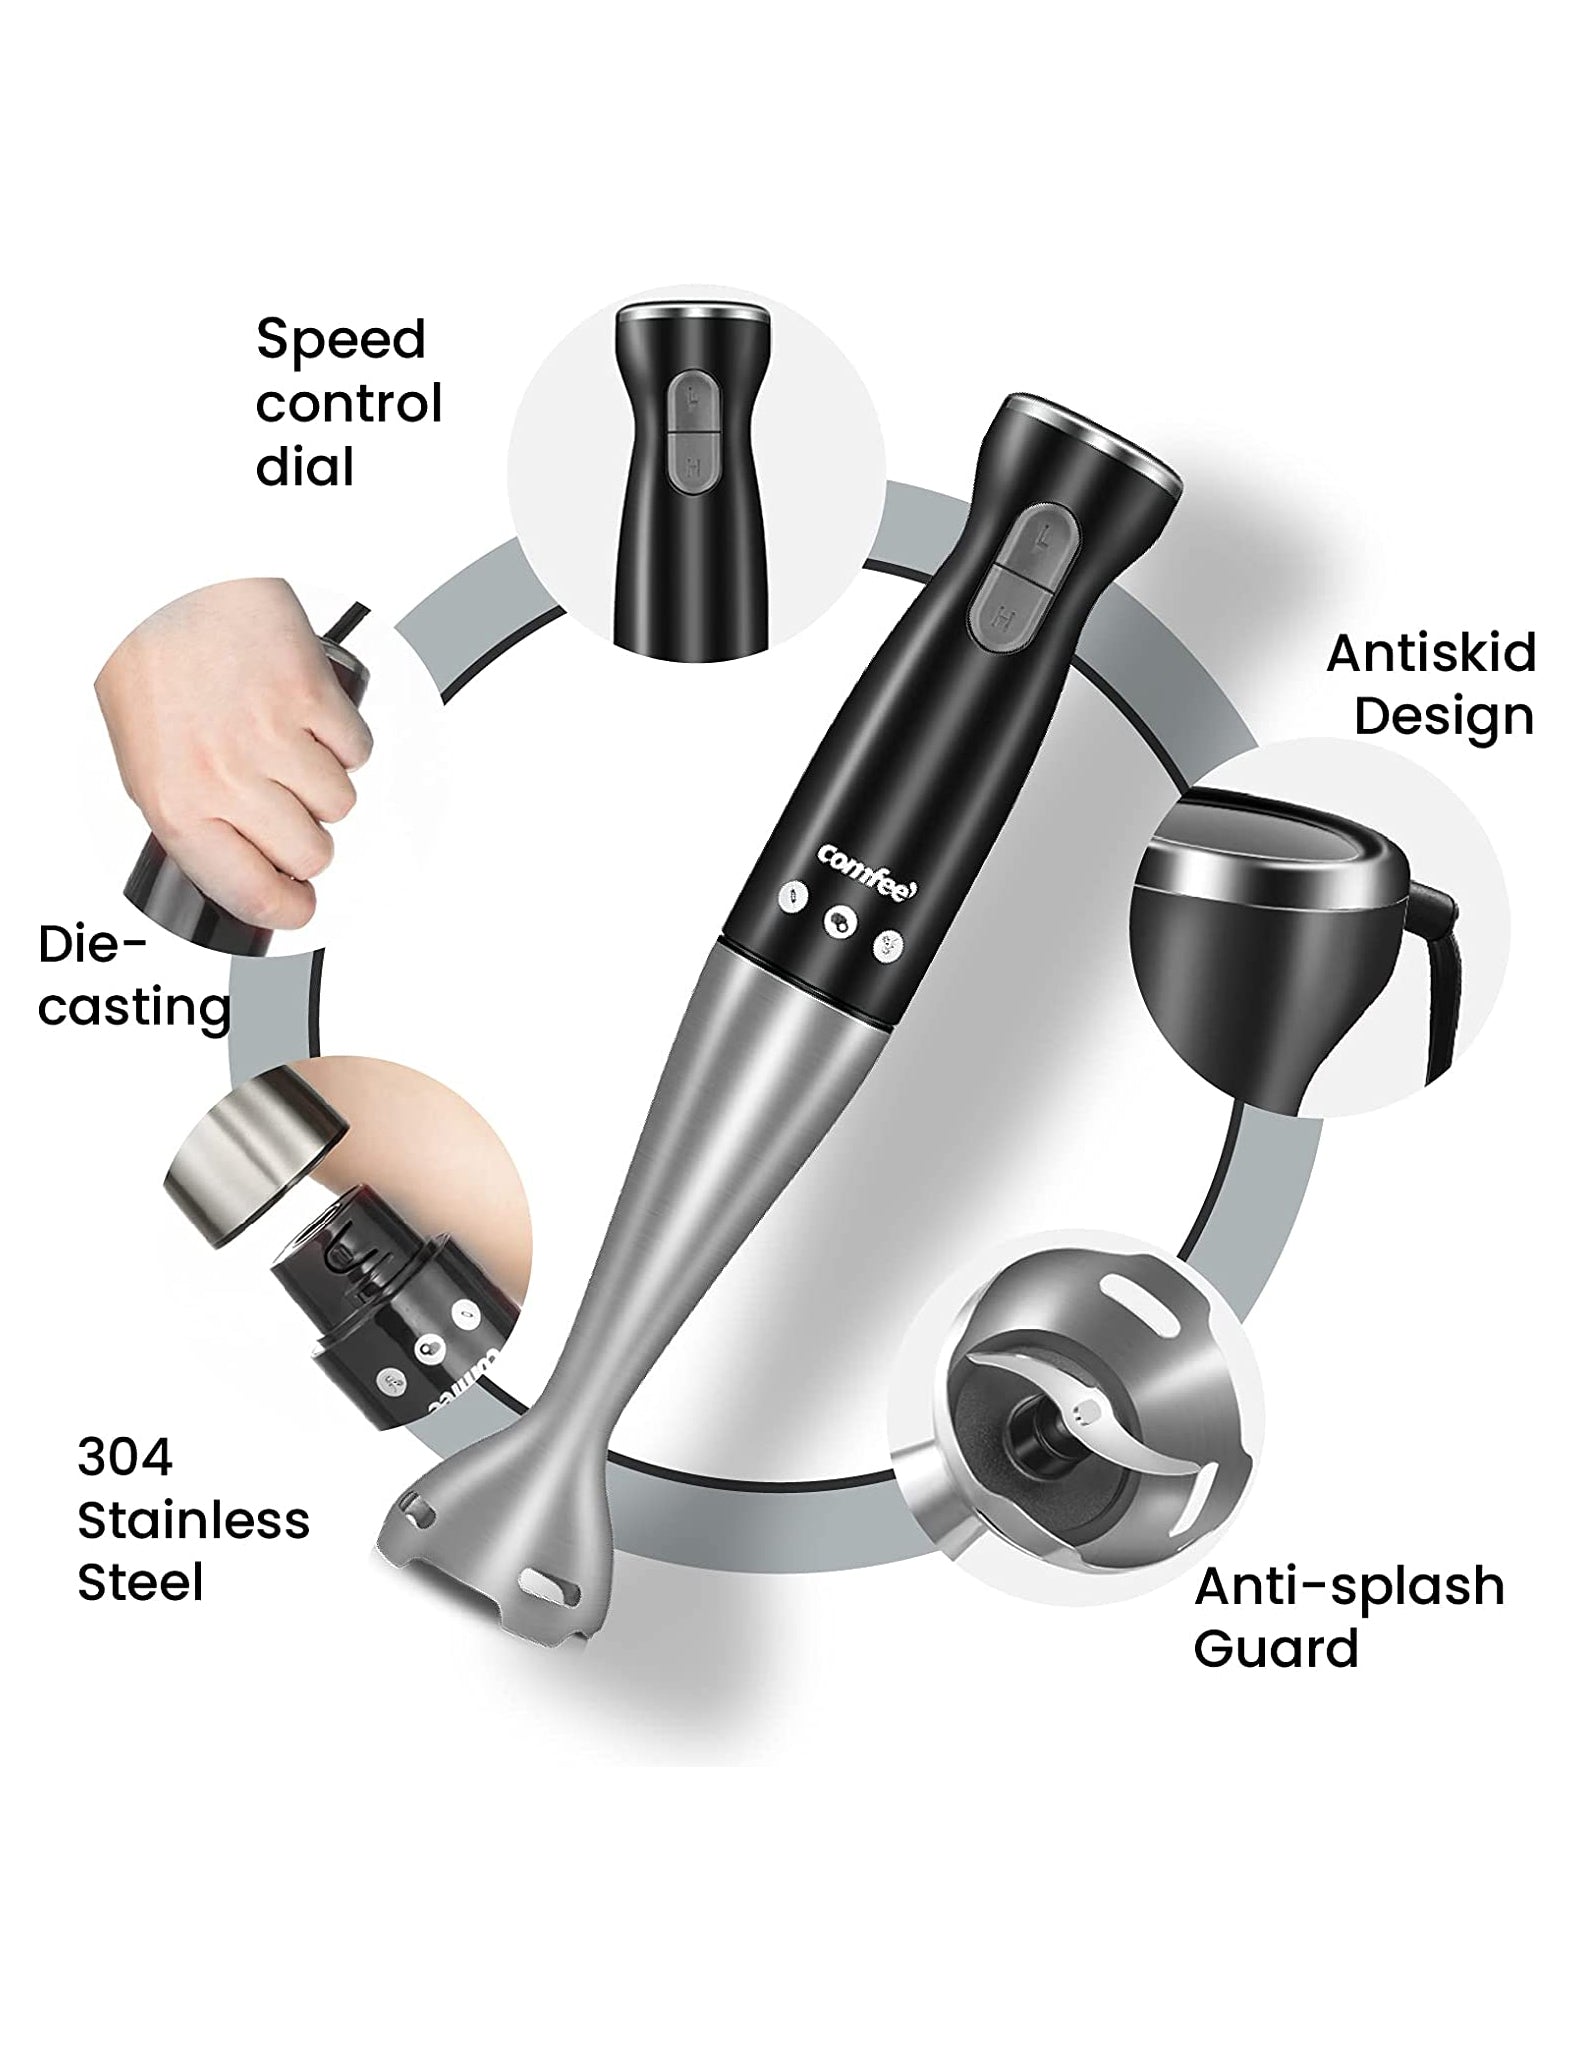 COMFEE' Immersion Hand Blender, Brushed Stainless Steel, 2-Speed